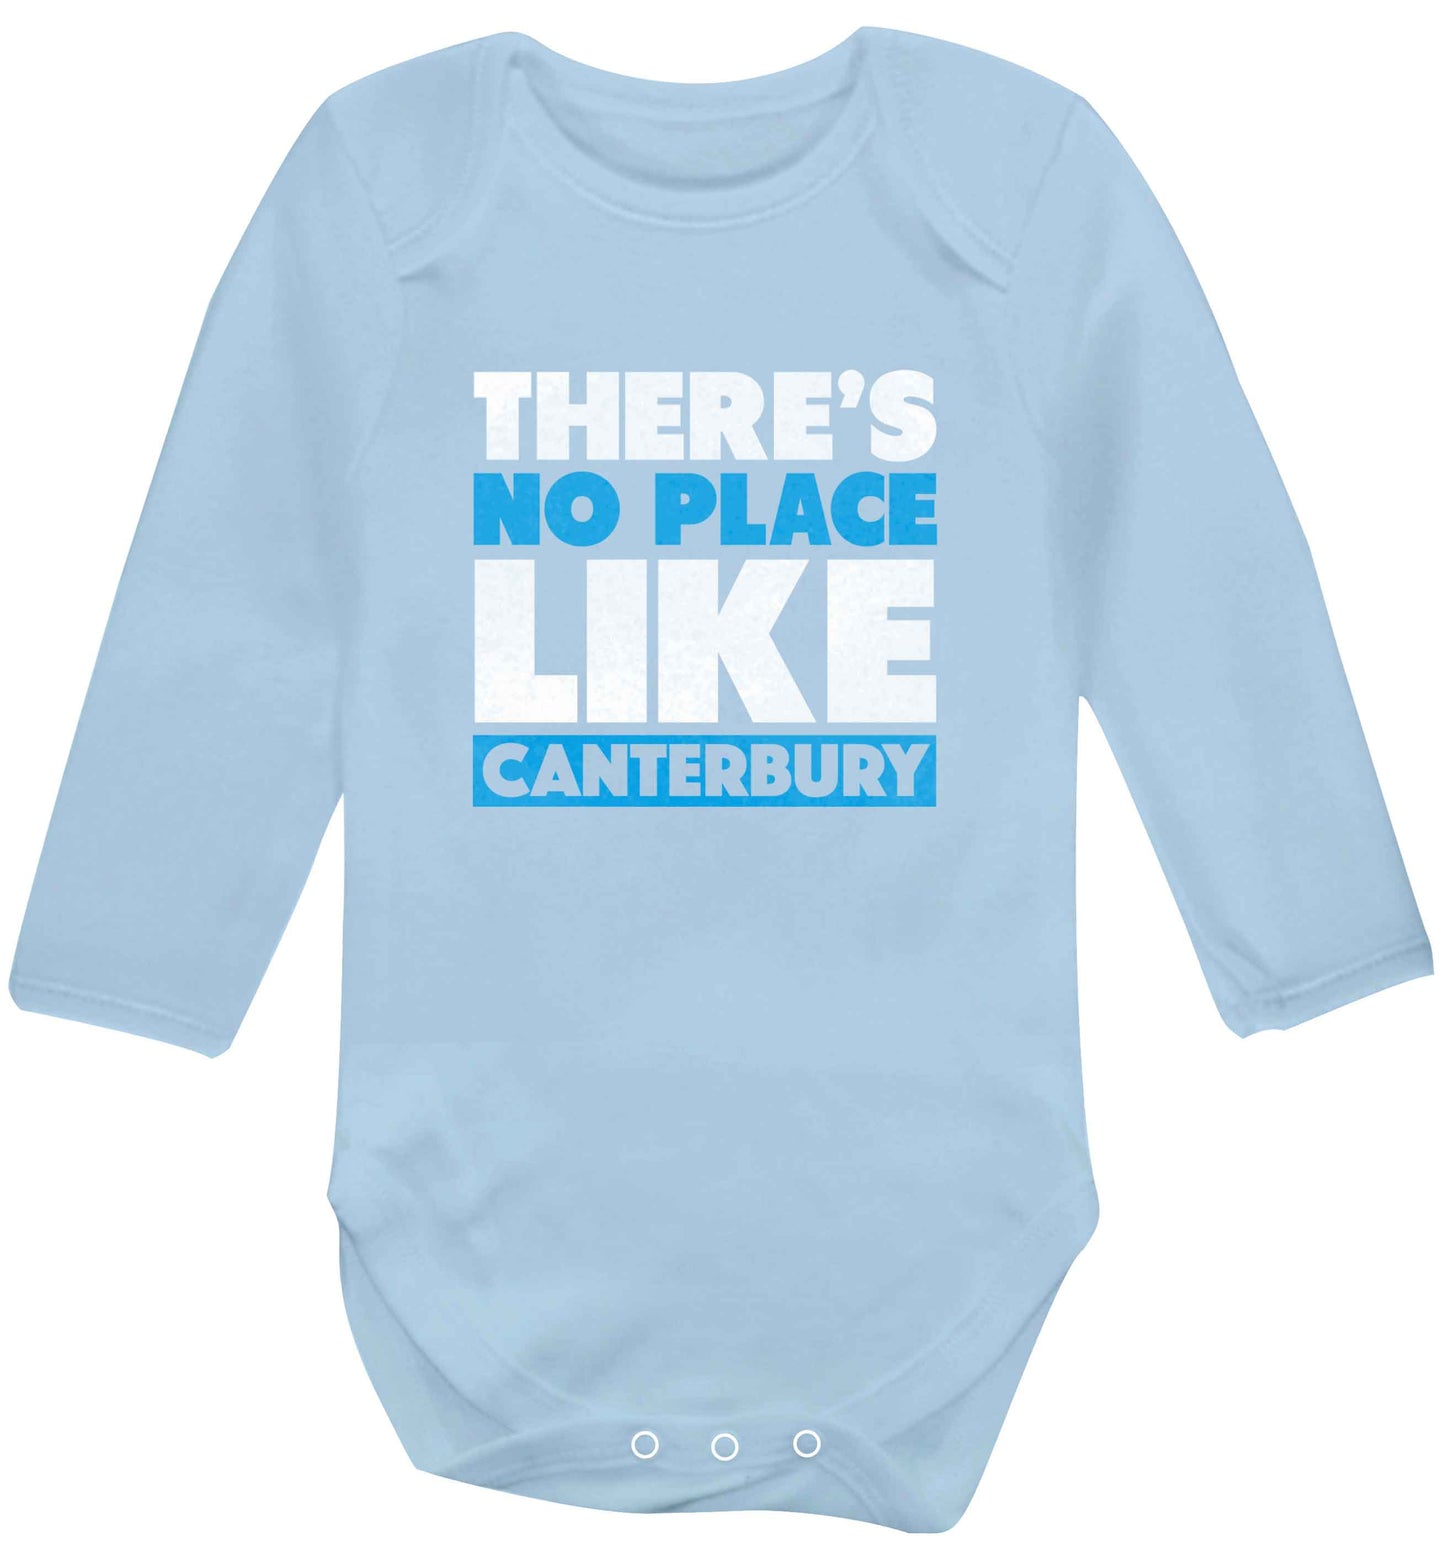 There's no place like Canterbury baby vest long sleeved pale blue 6-12 months